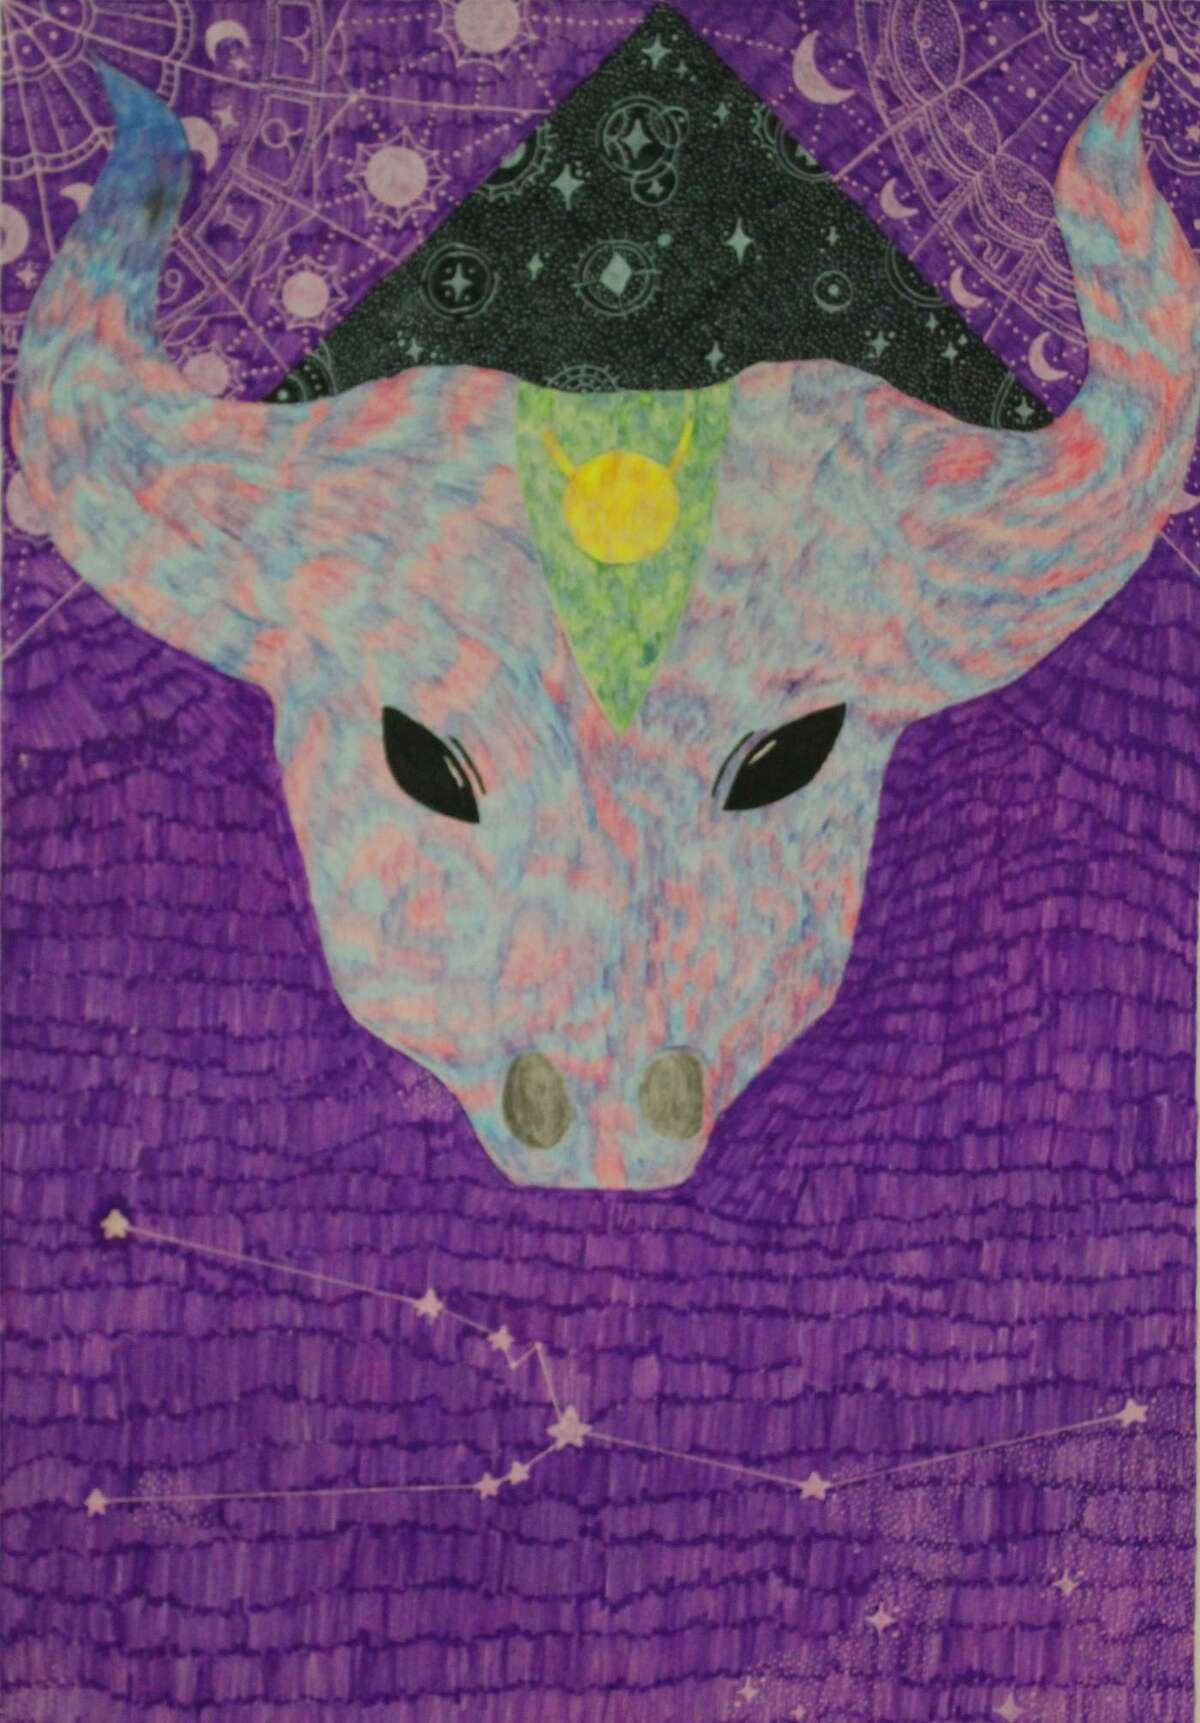 “Moving Forward: Artwork by Brookfield High School Art Students” will be on view at Brookfield Library through April. Pictured is an artwork by Delilah Jaros.